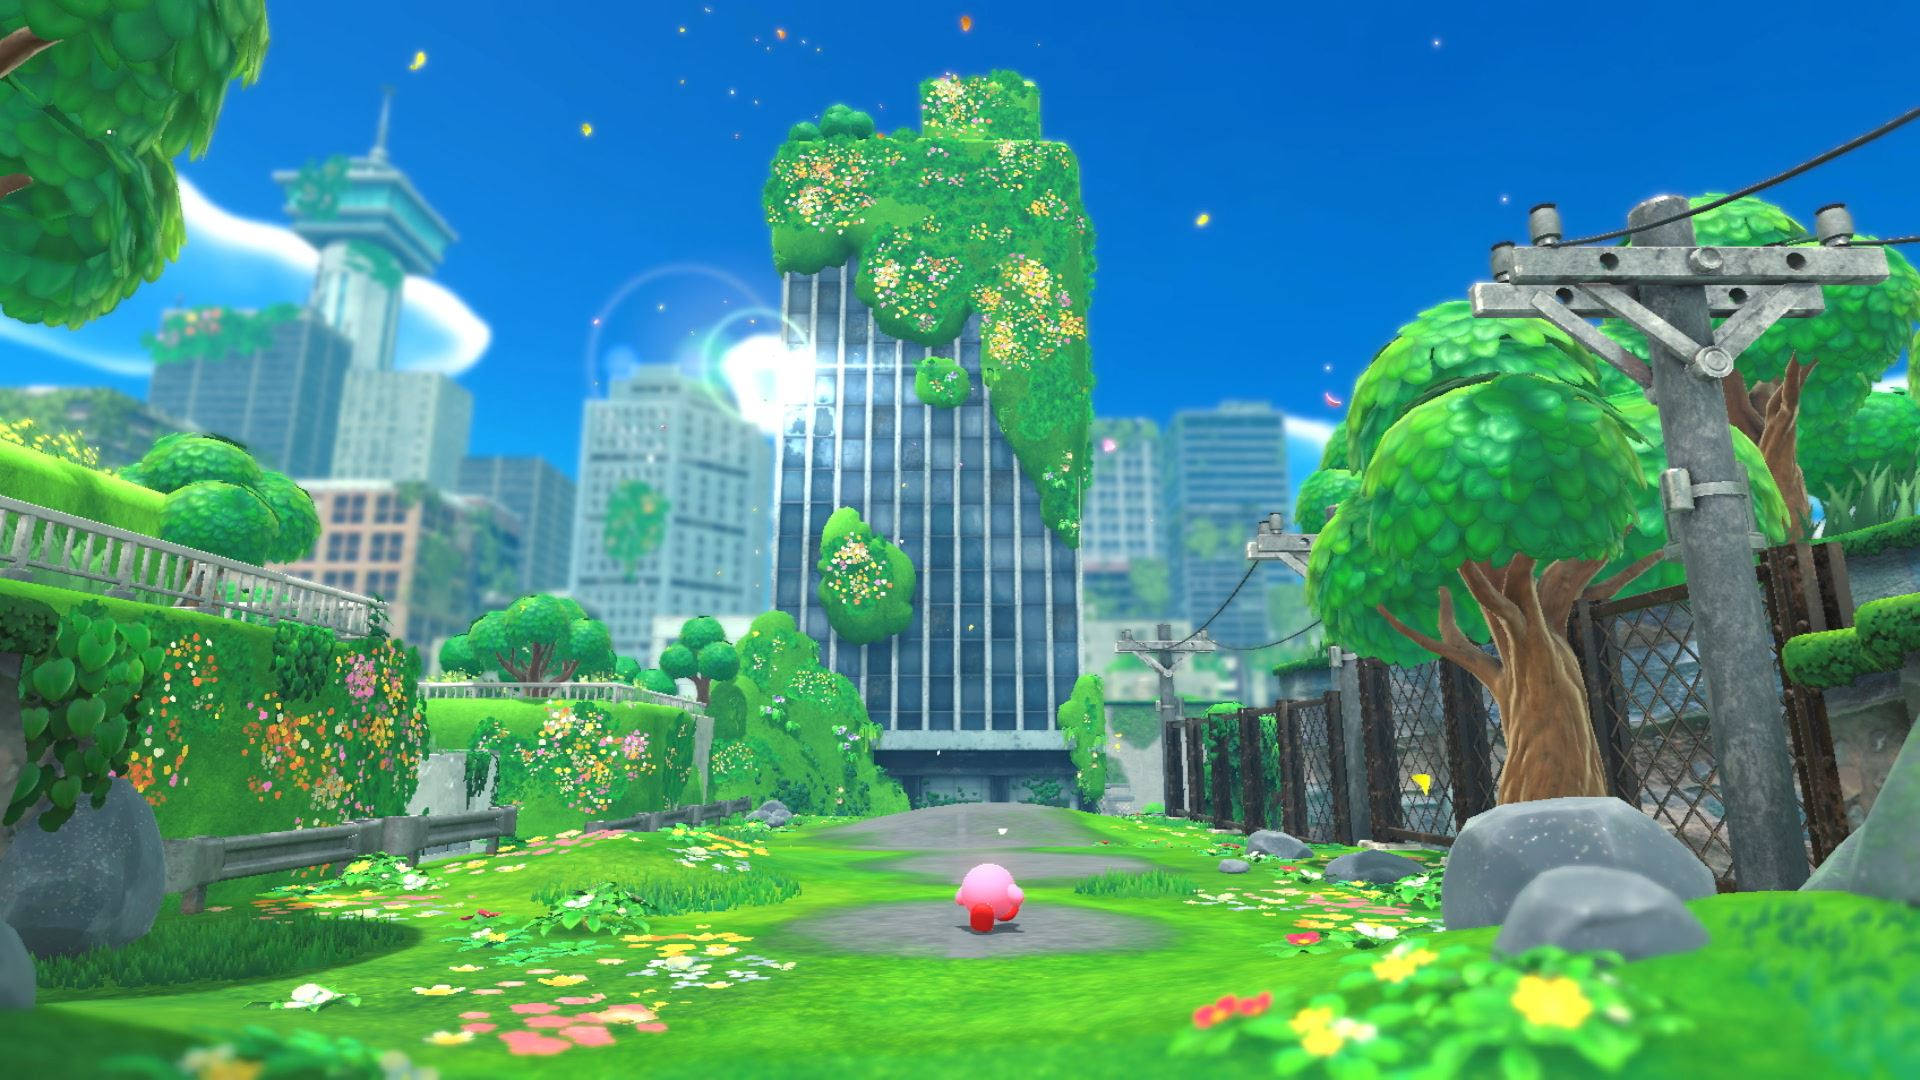 Kirby And The Forgotten Land File Size And Supported Languages